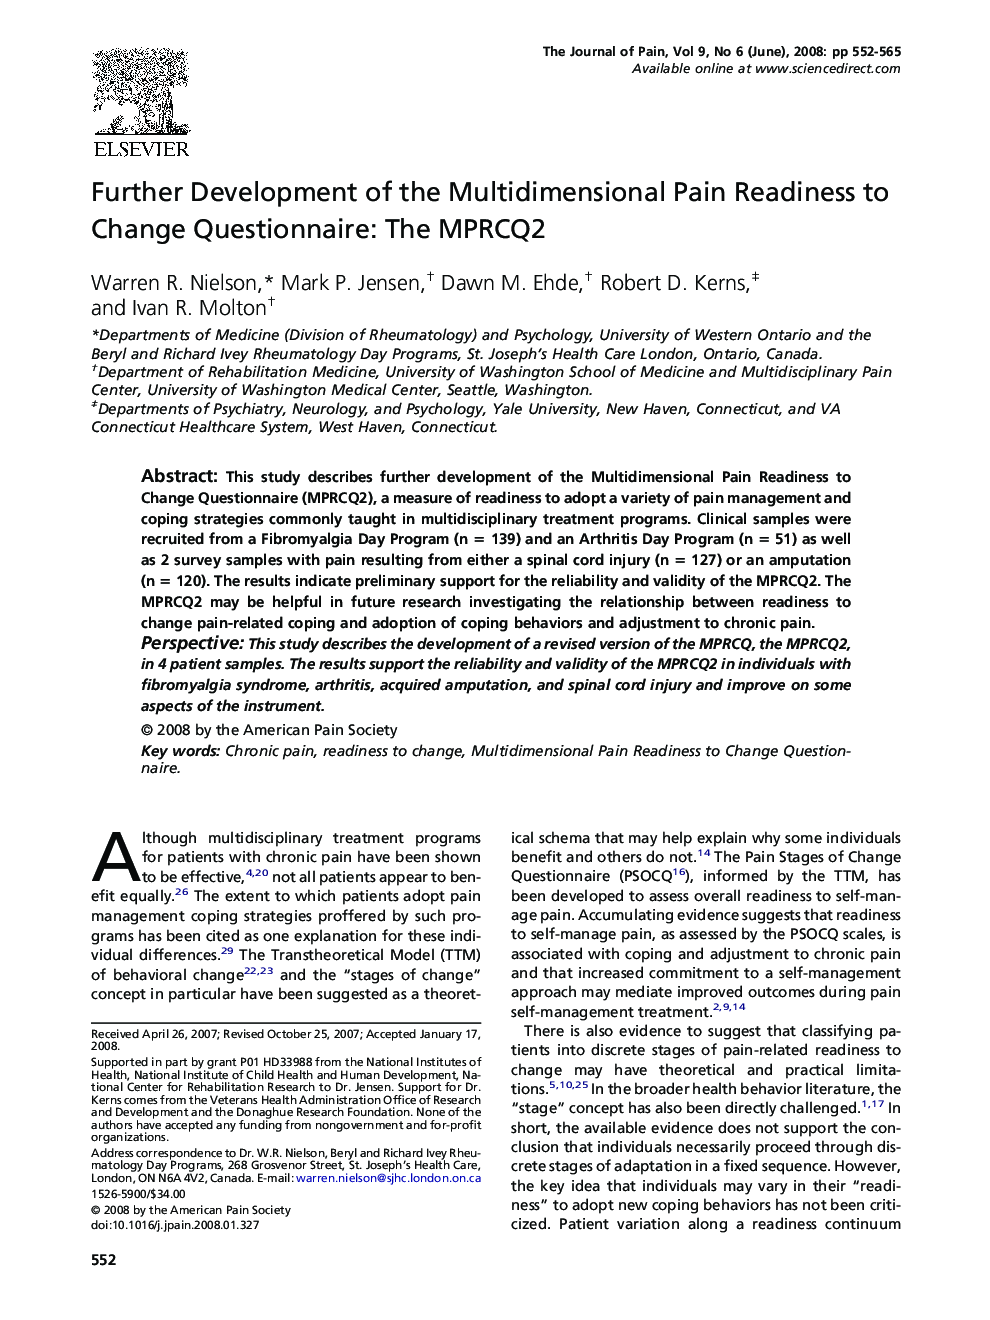 Further Development of the Multidimensional Pain Readiness to Change Questionnaire: The MPRCQ2 